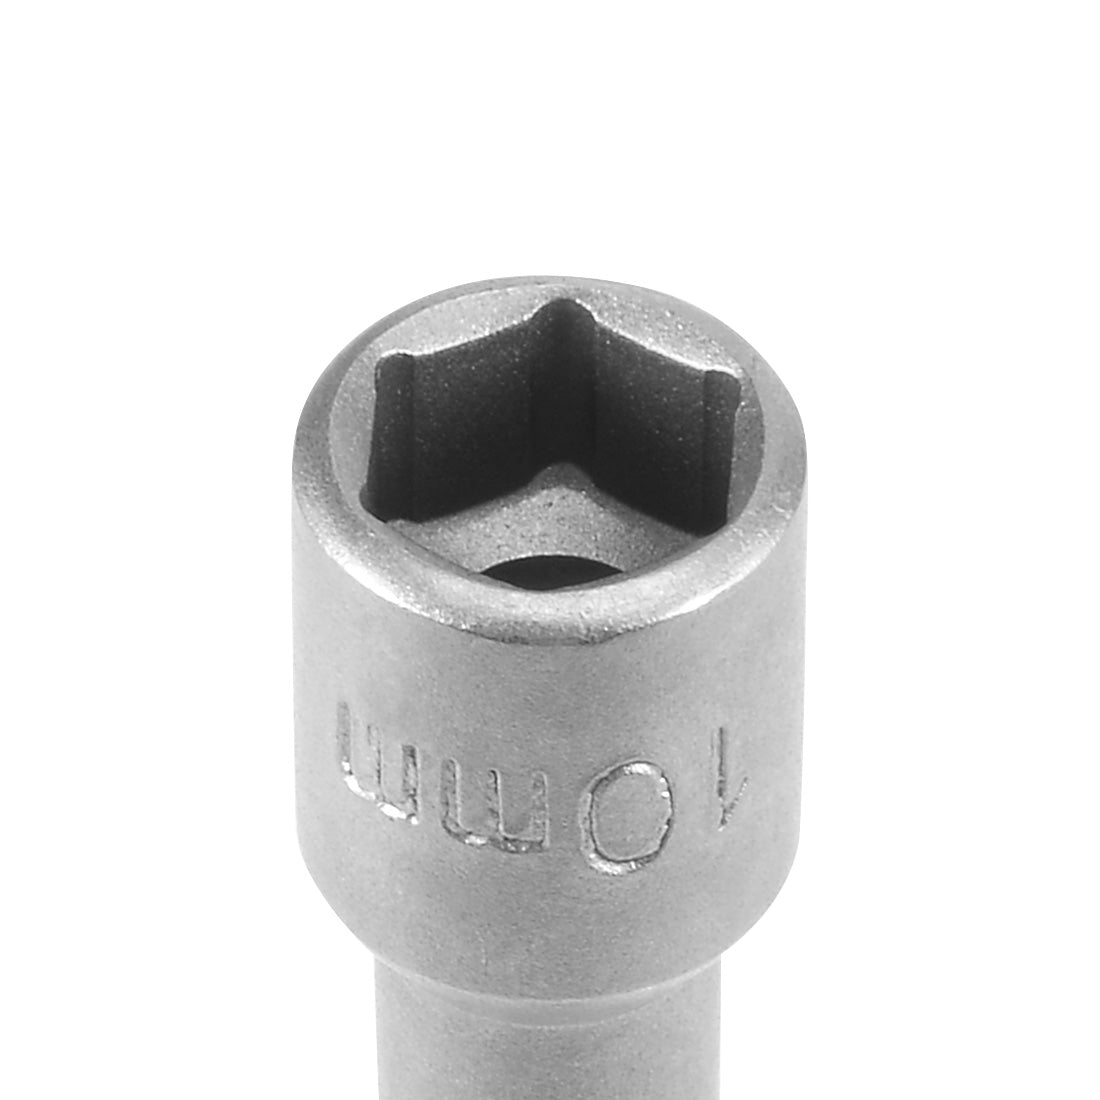 Uxcell Uxcell 5Pcs 1/4" Quick Change Shank 8mm Non-Magnetic Nut Socket Driver Wrench 4" Length